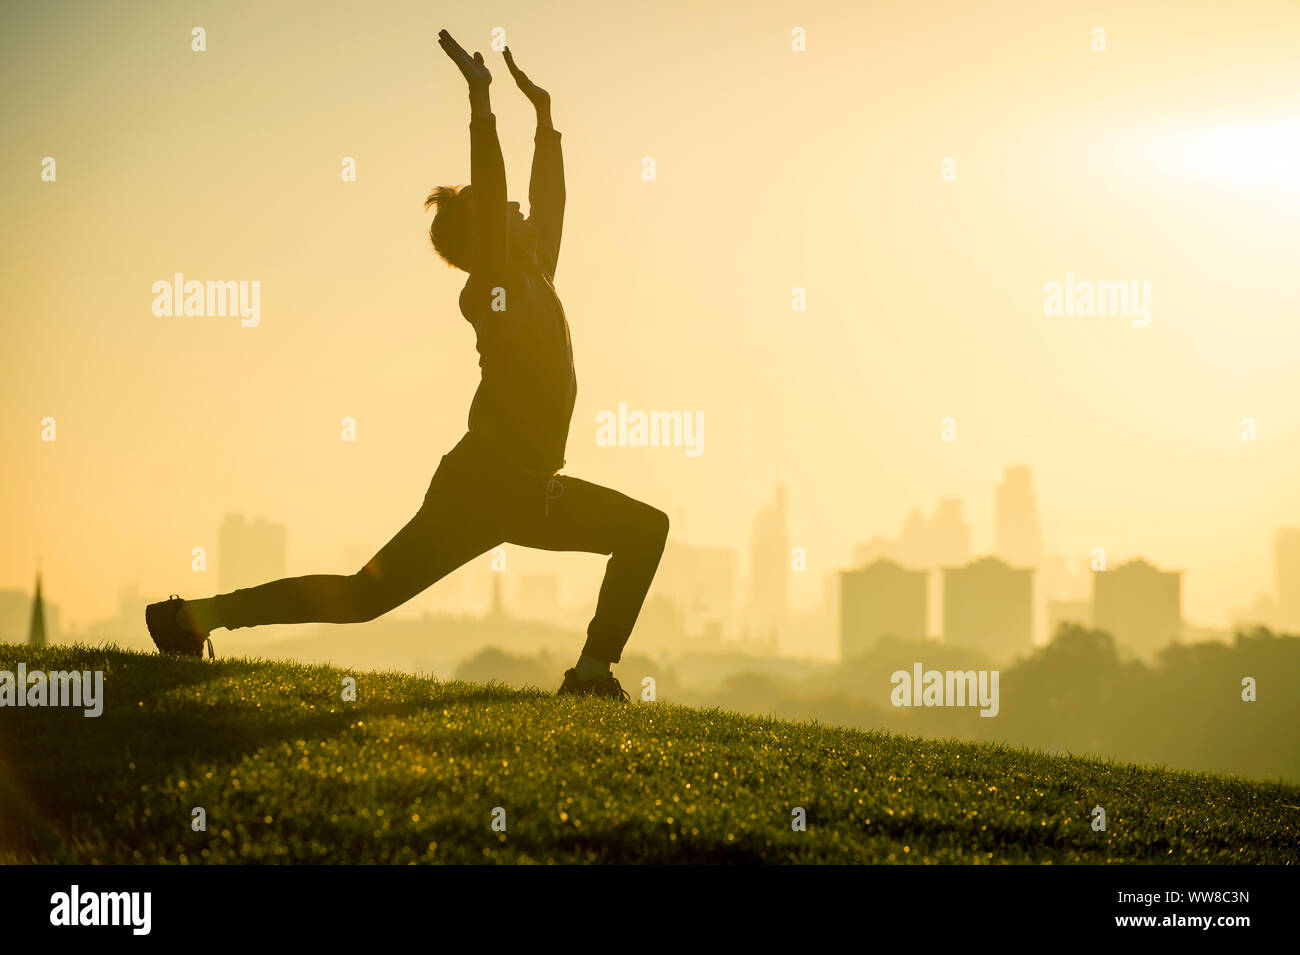 Silhouette Man His Arms Stretched Out Stock Photo 22837546